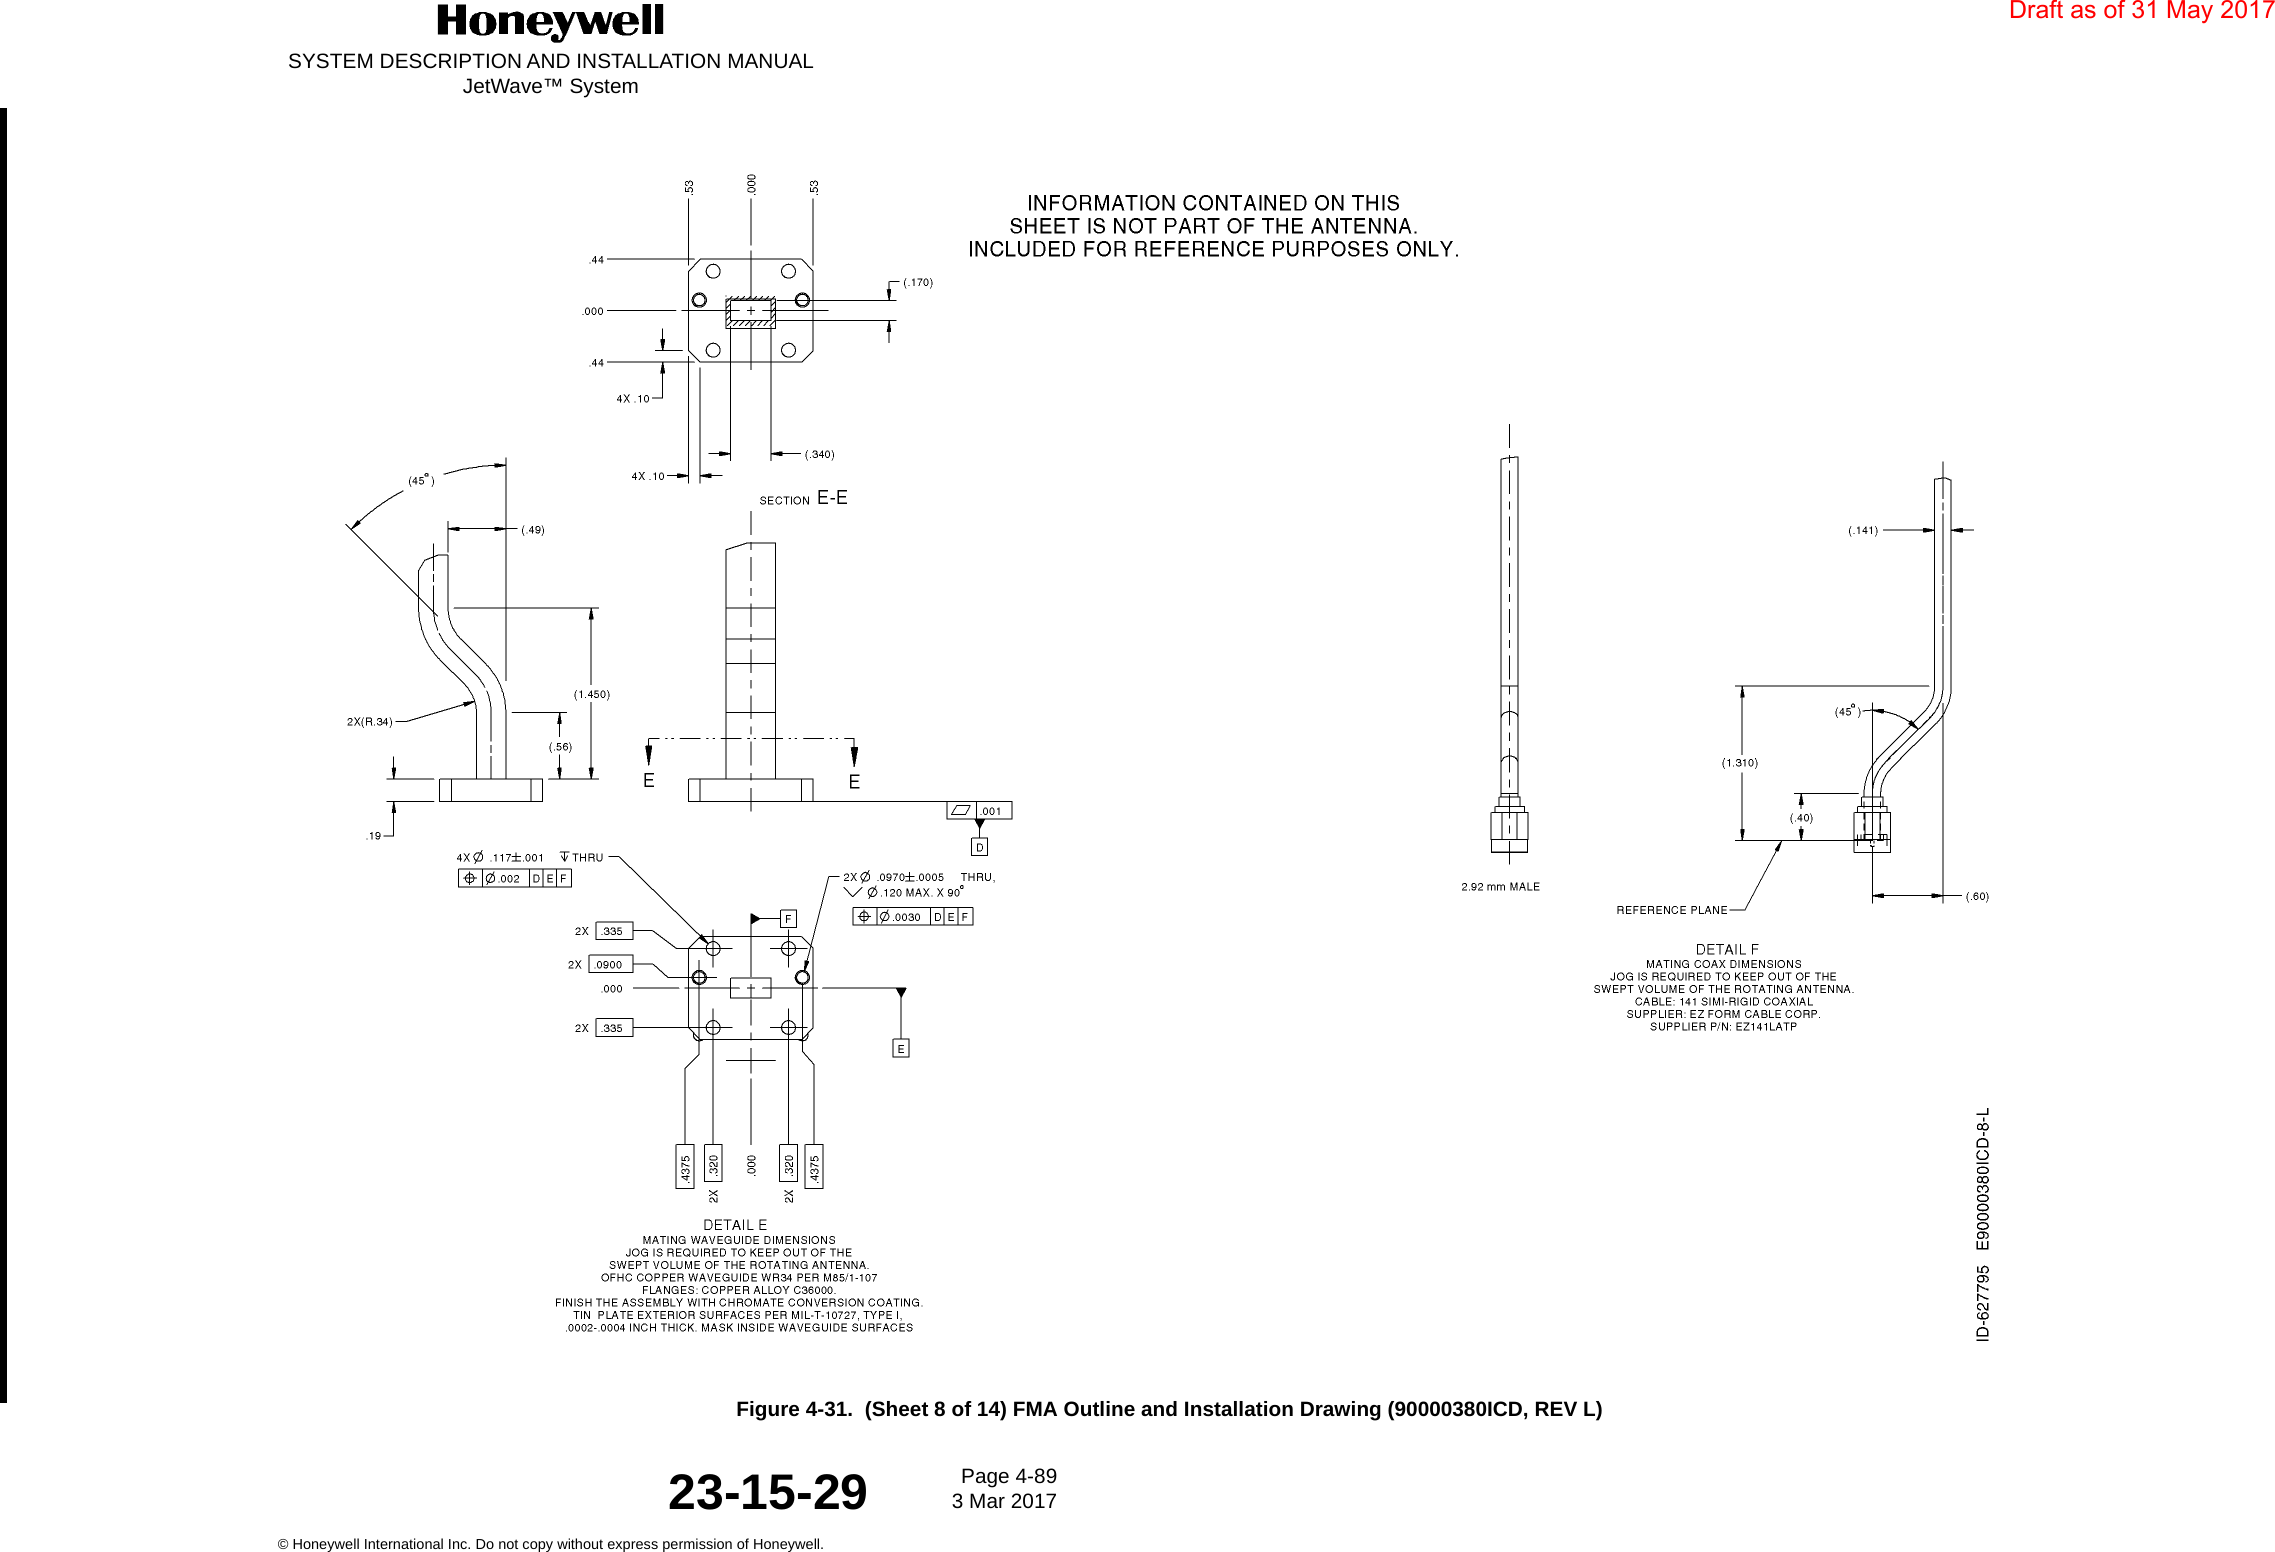 SYSTEM DESCRIPTION AND INSTALLATION MANUALJetWave™ SystemPage 4-89 3 Mar 2017© Honeywell International Inc. Do not copy without express permission of Honeywell.23-15-29Figure 4-31.  (Sheet 8 of 14) FMA Outline and Installation Drawing (90000380ICD, REV L)Draft as of 31 May 2017